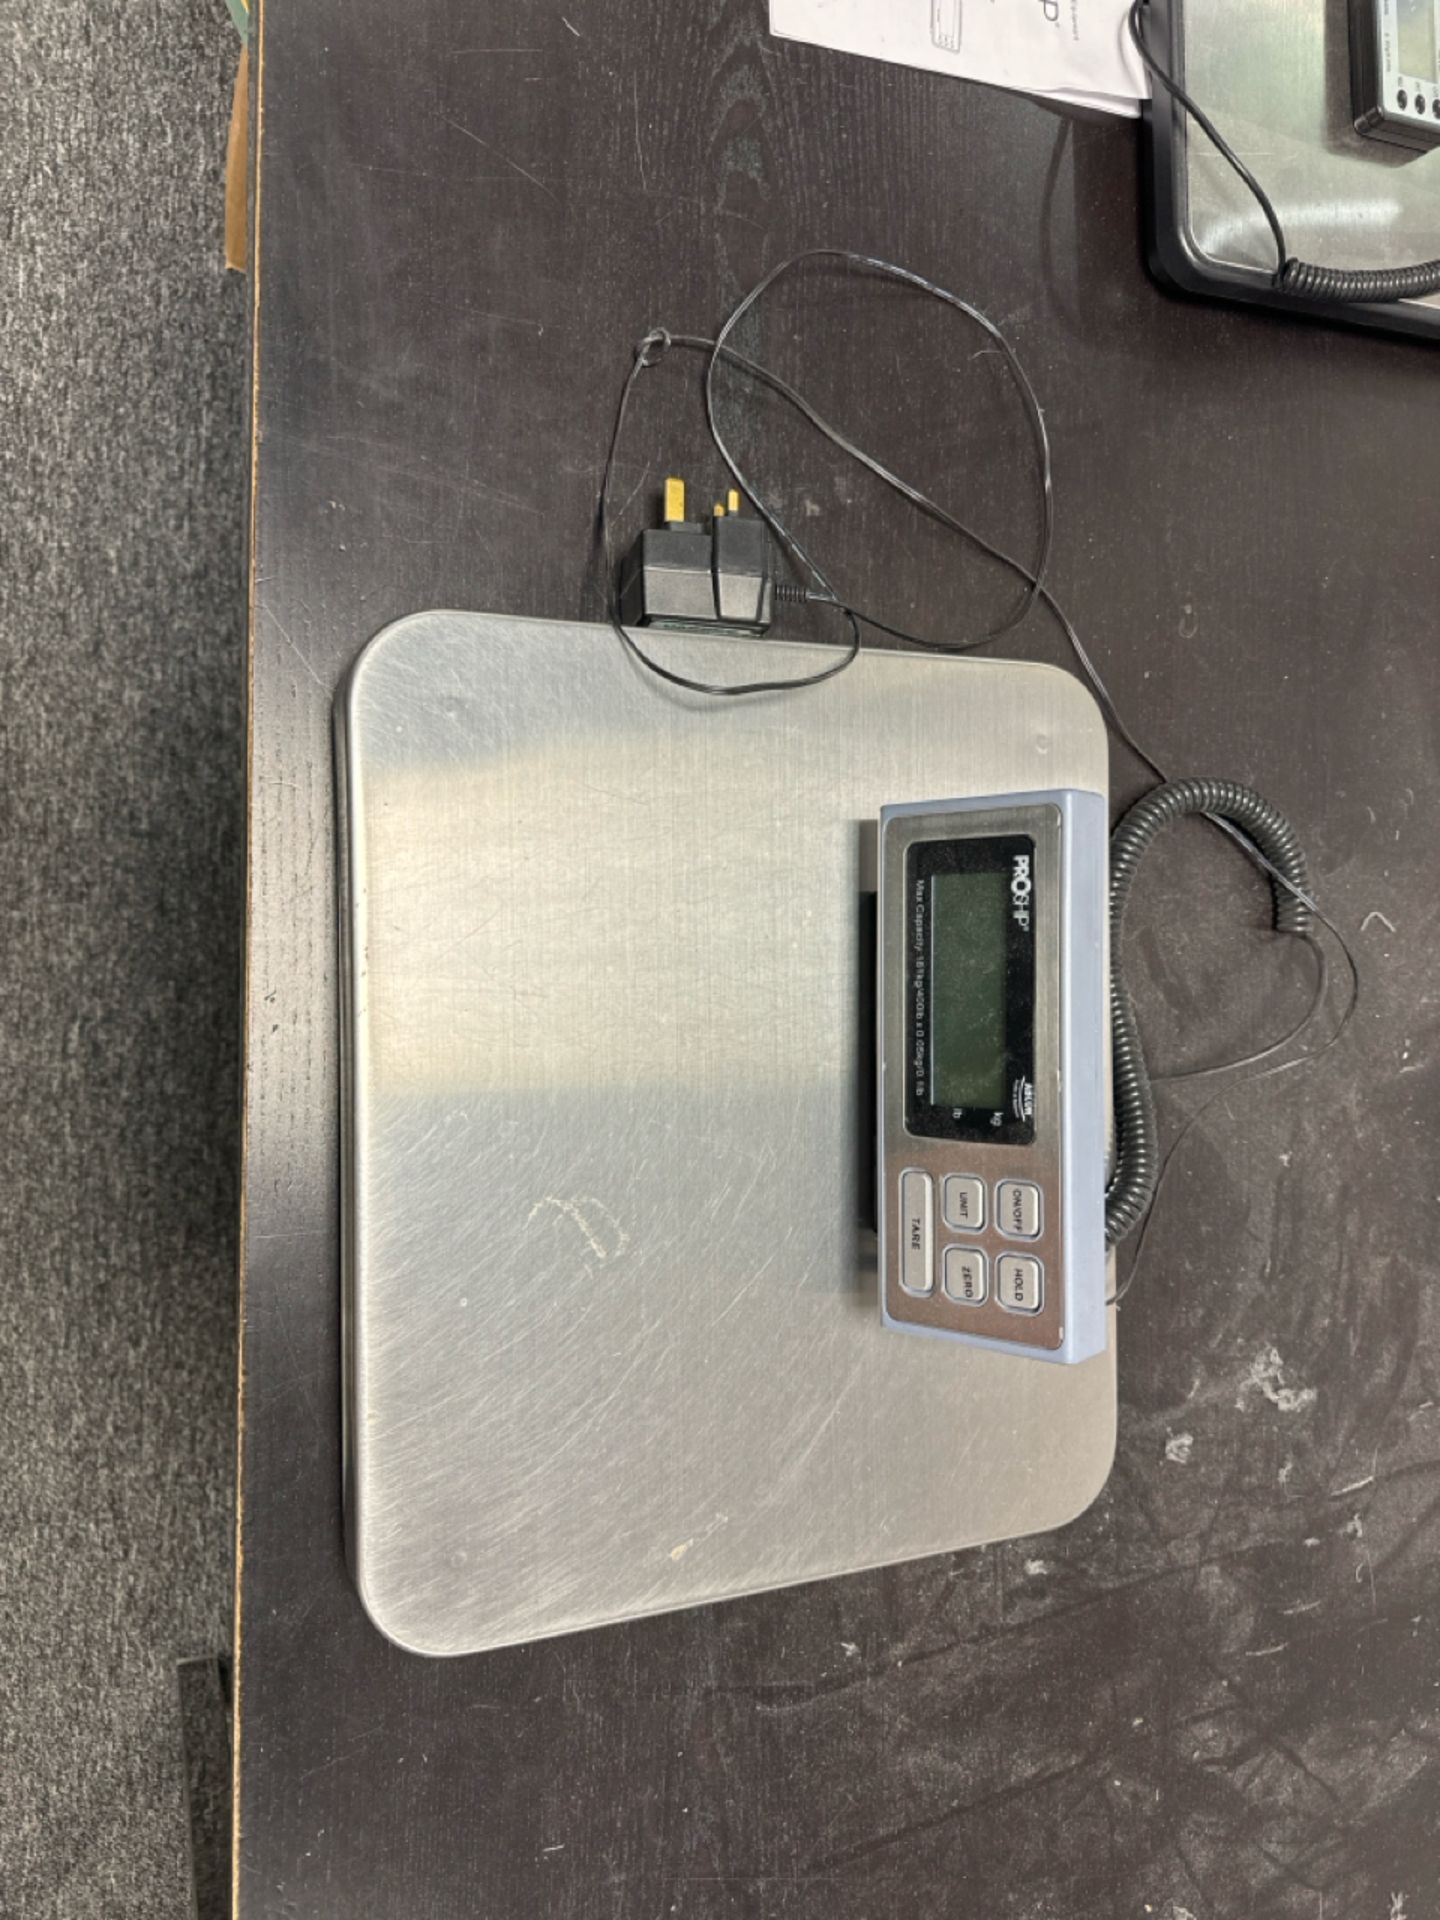 Proship Abcon Scales - Image 2 of 3